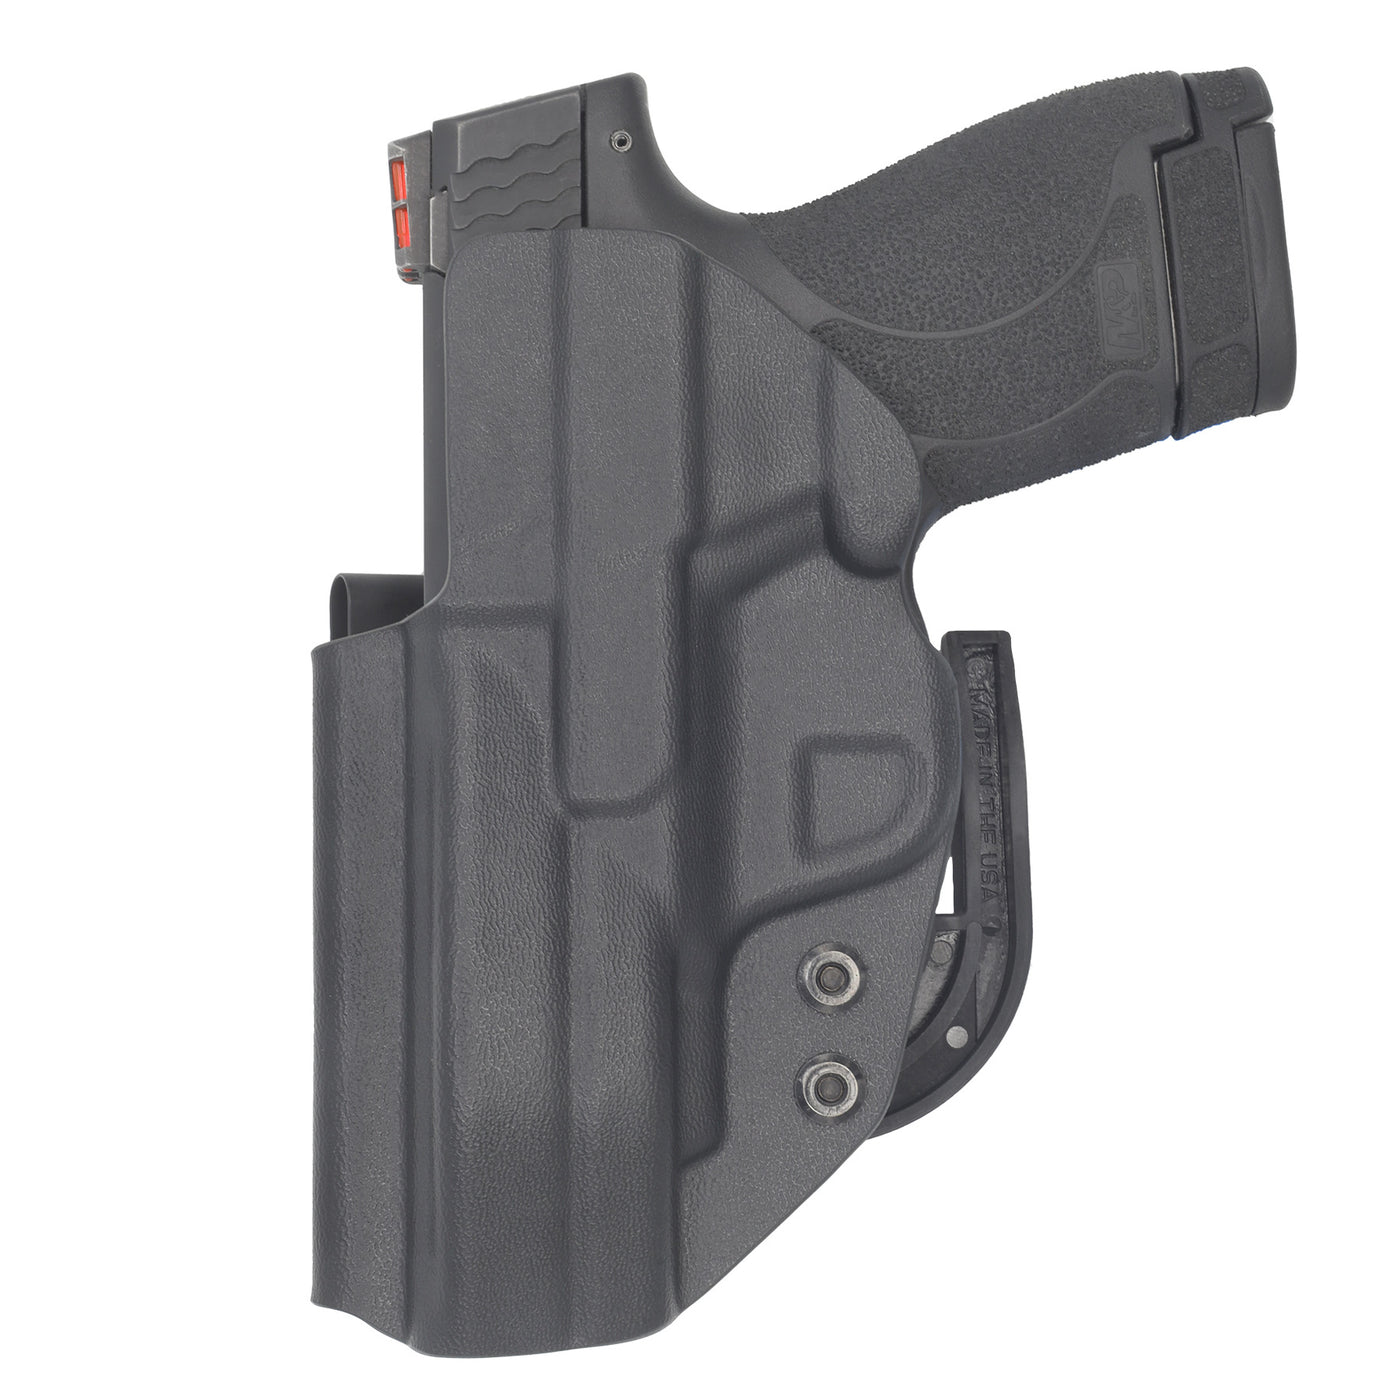 C&G Holsters custom Alpha IWB kydex holster for Smith & Wesson M&P Shield 9/40 in holstered position rear view